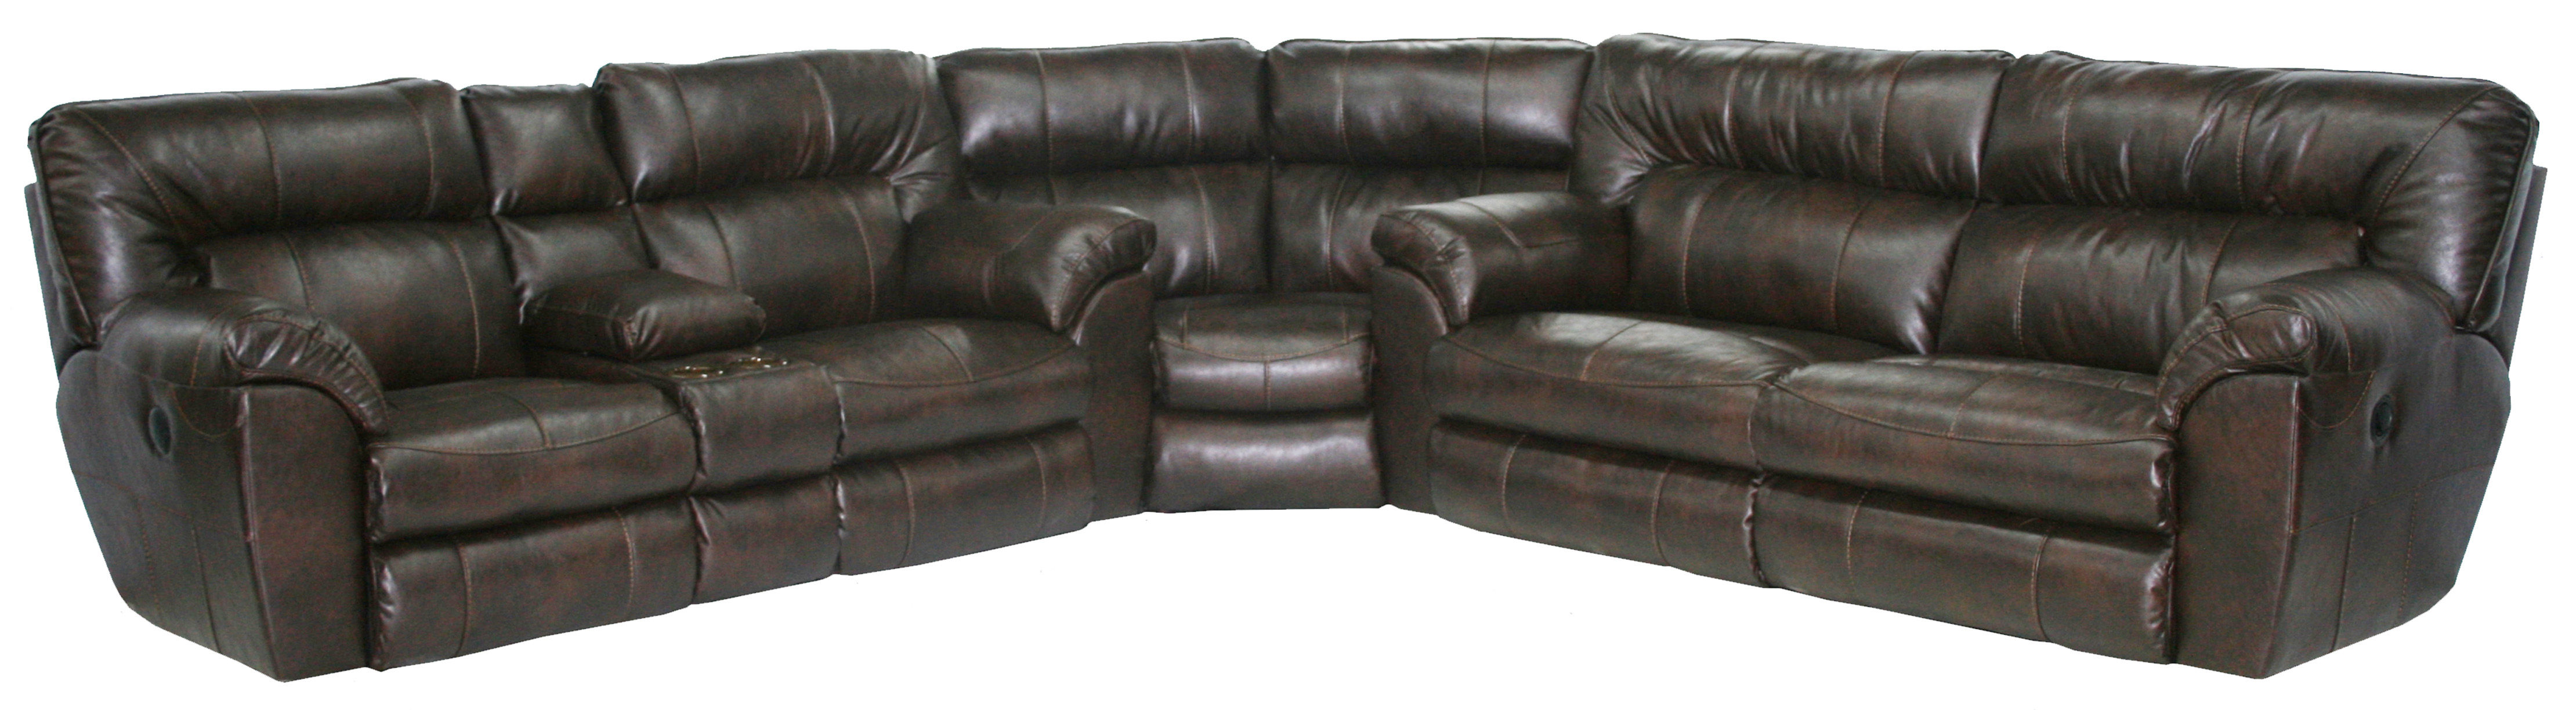 Nolan Reclining Sectional Extra Wide, Extra Long Leather Sectional